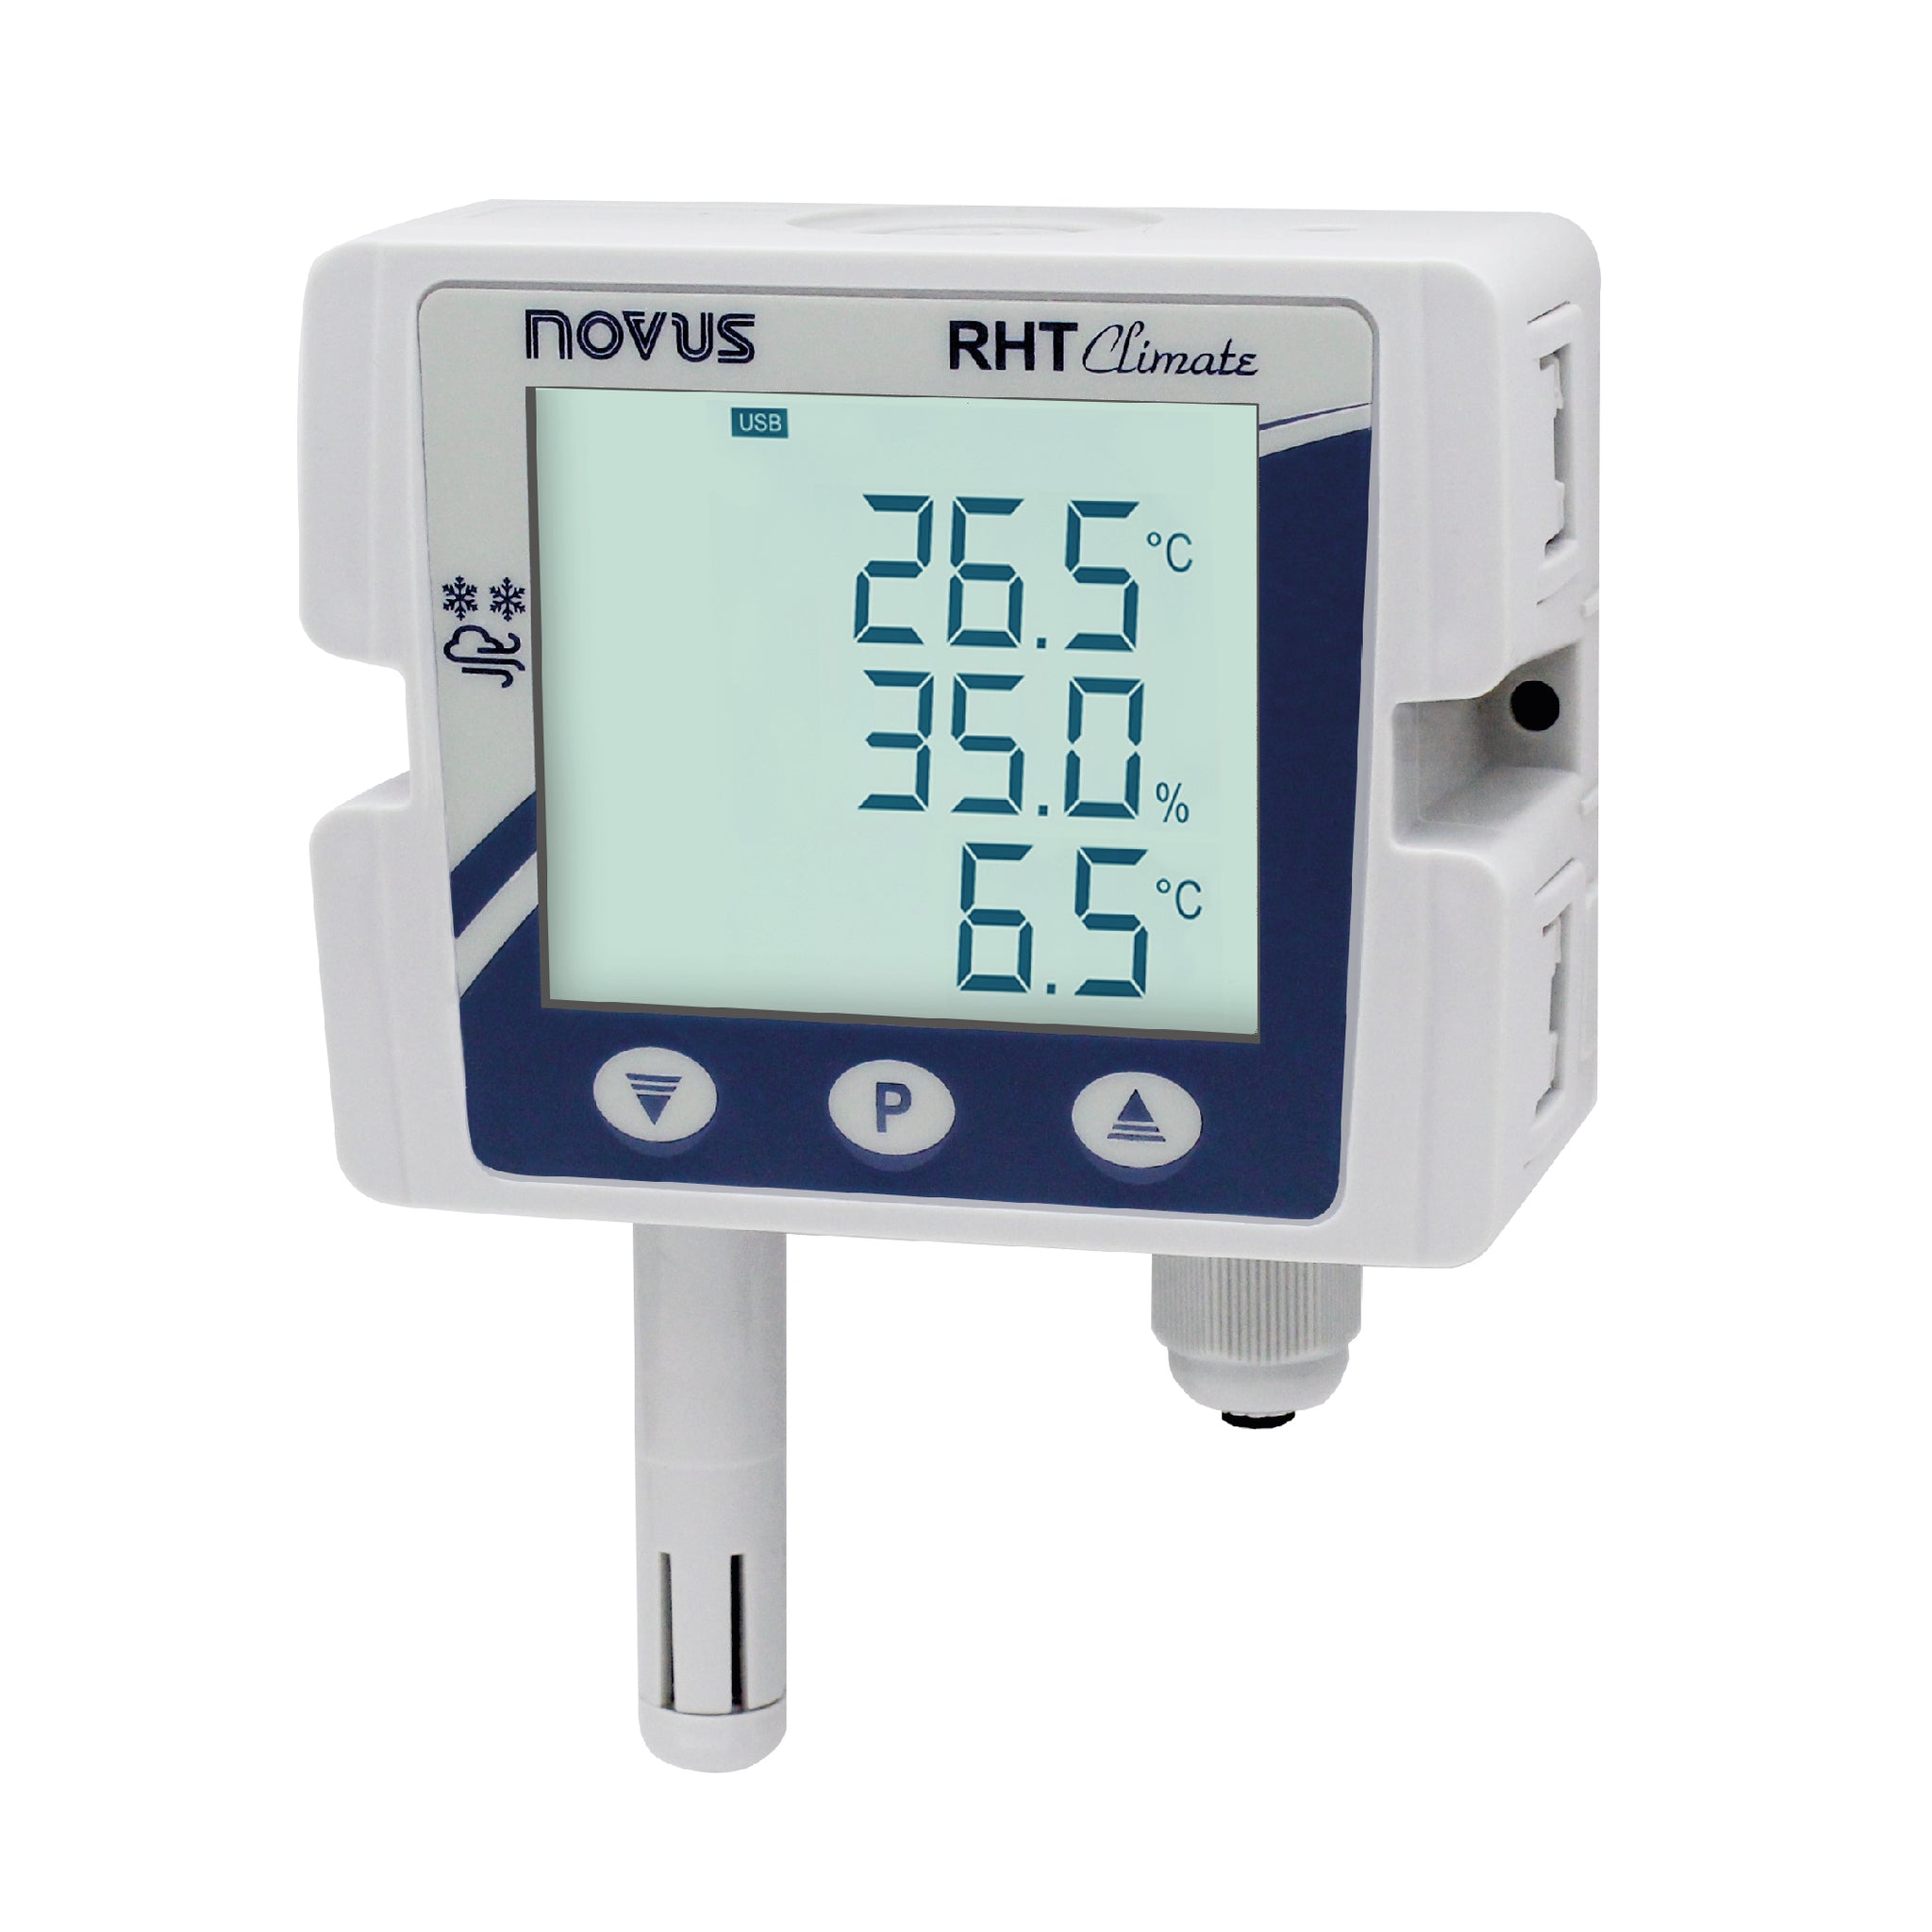 ModBus RS485 Industrial Temperature and Humidity Sensor with Display